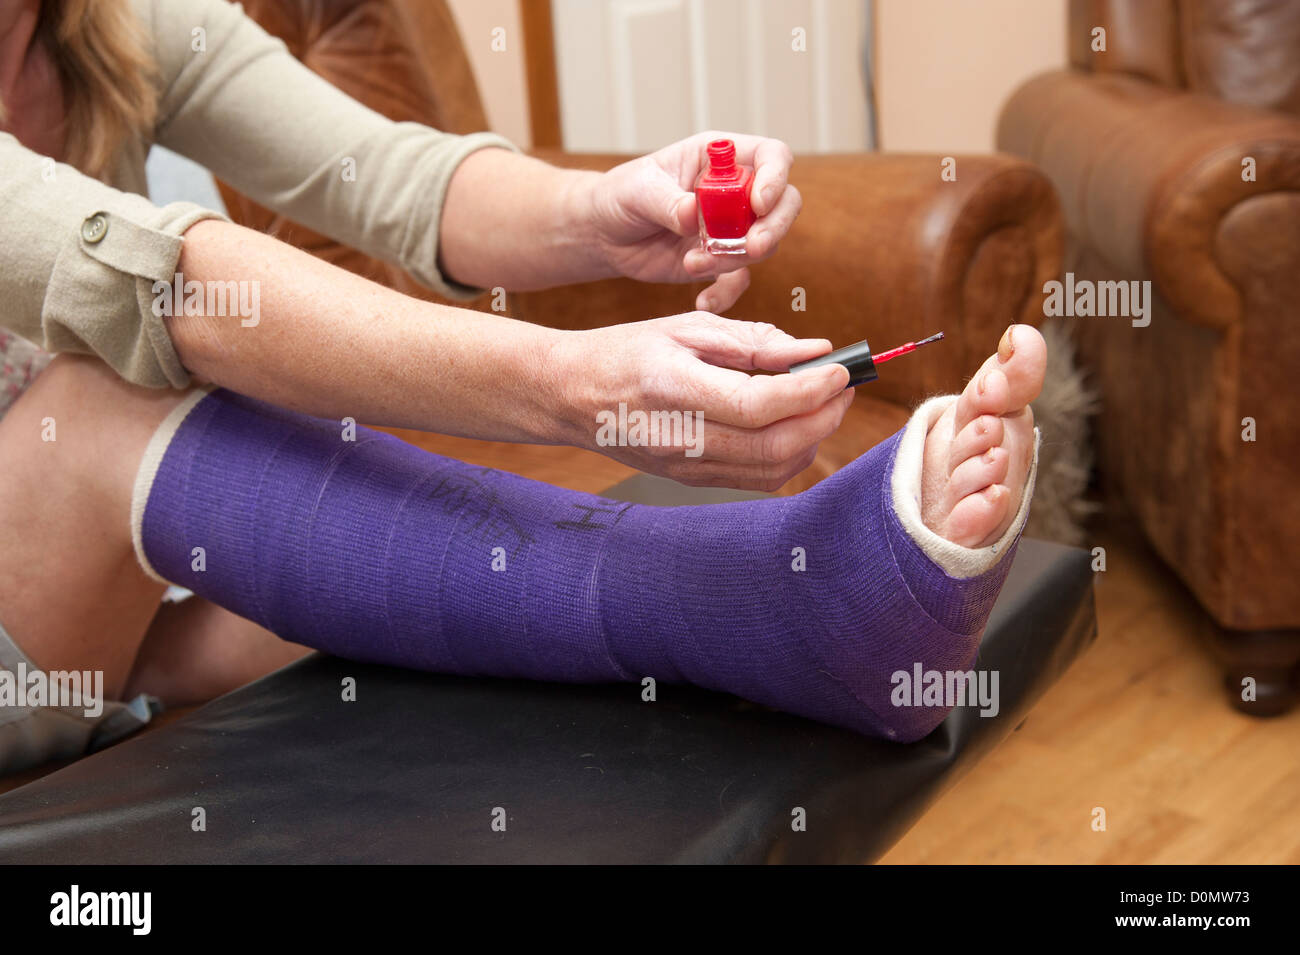 Woman with broken ankle painting her toe nails with red nail polish Stock Photo